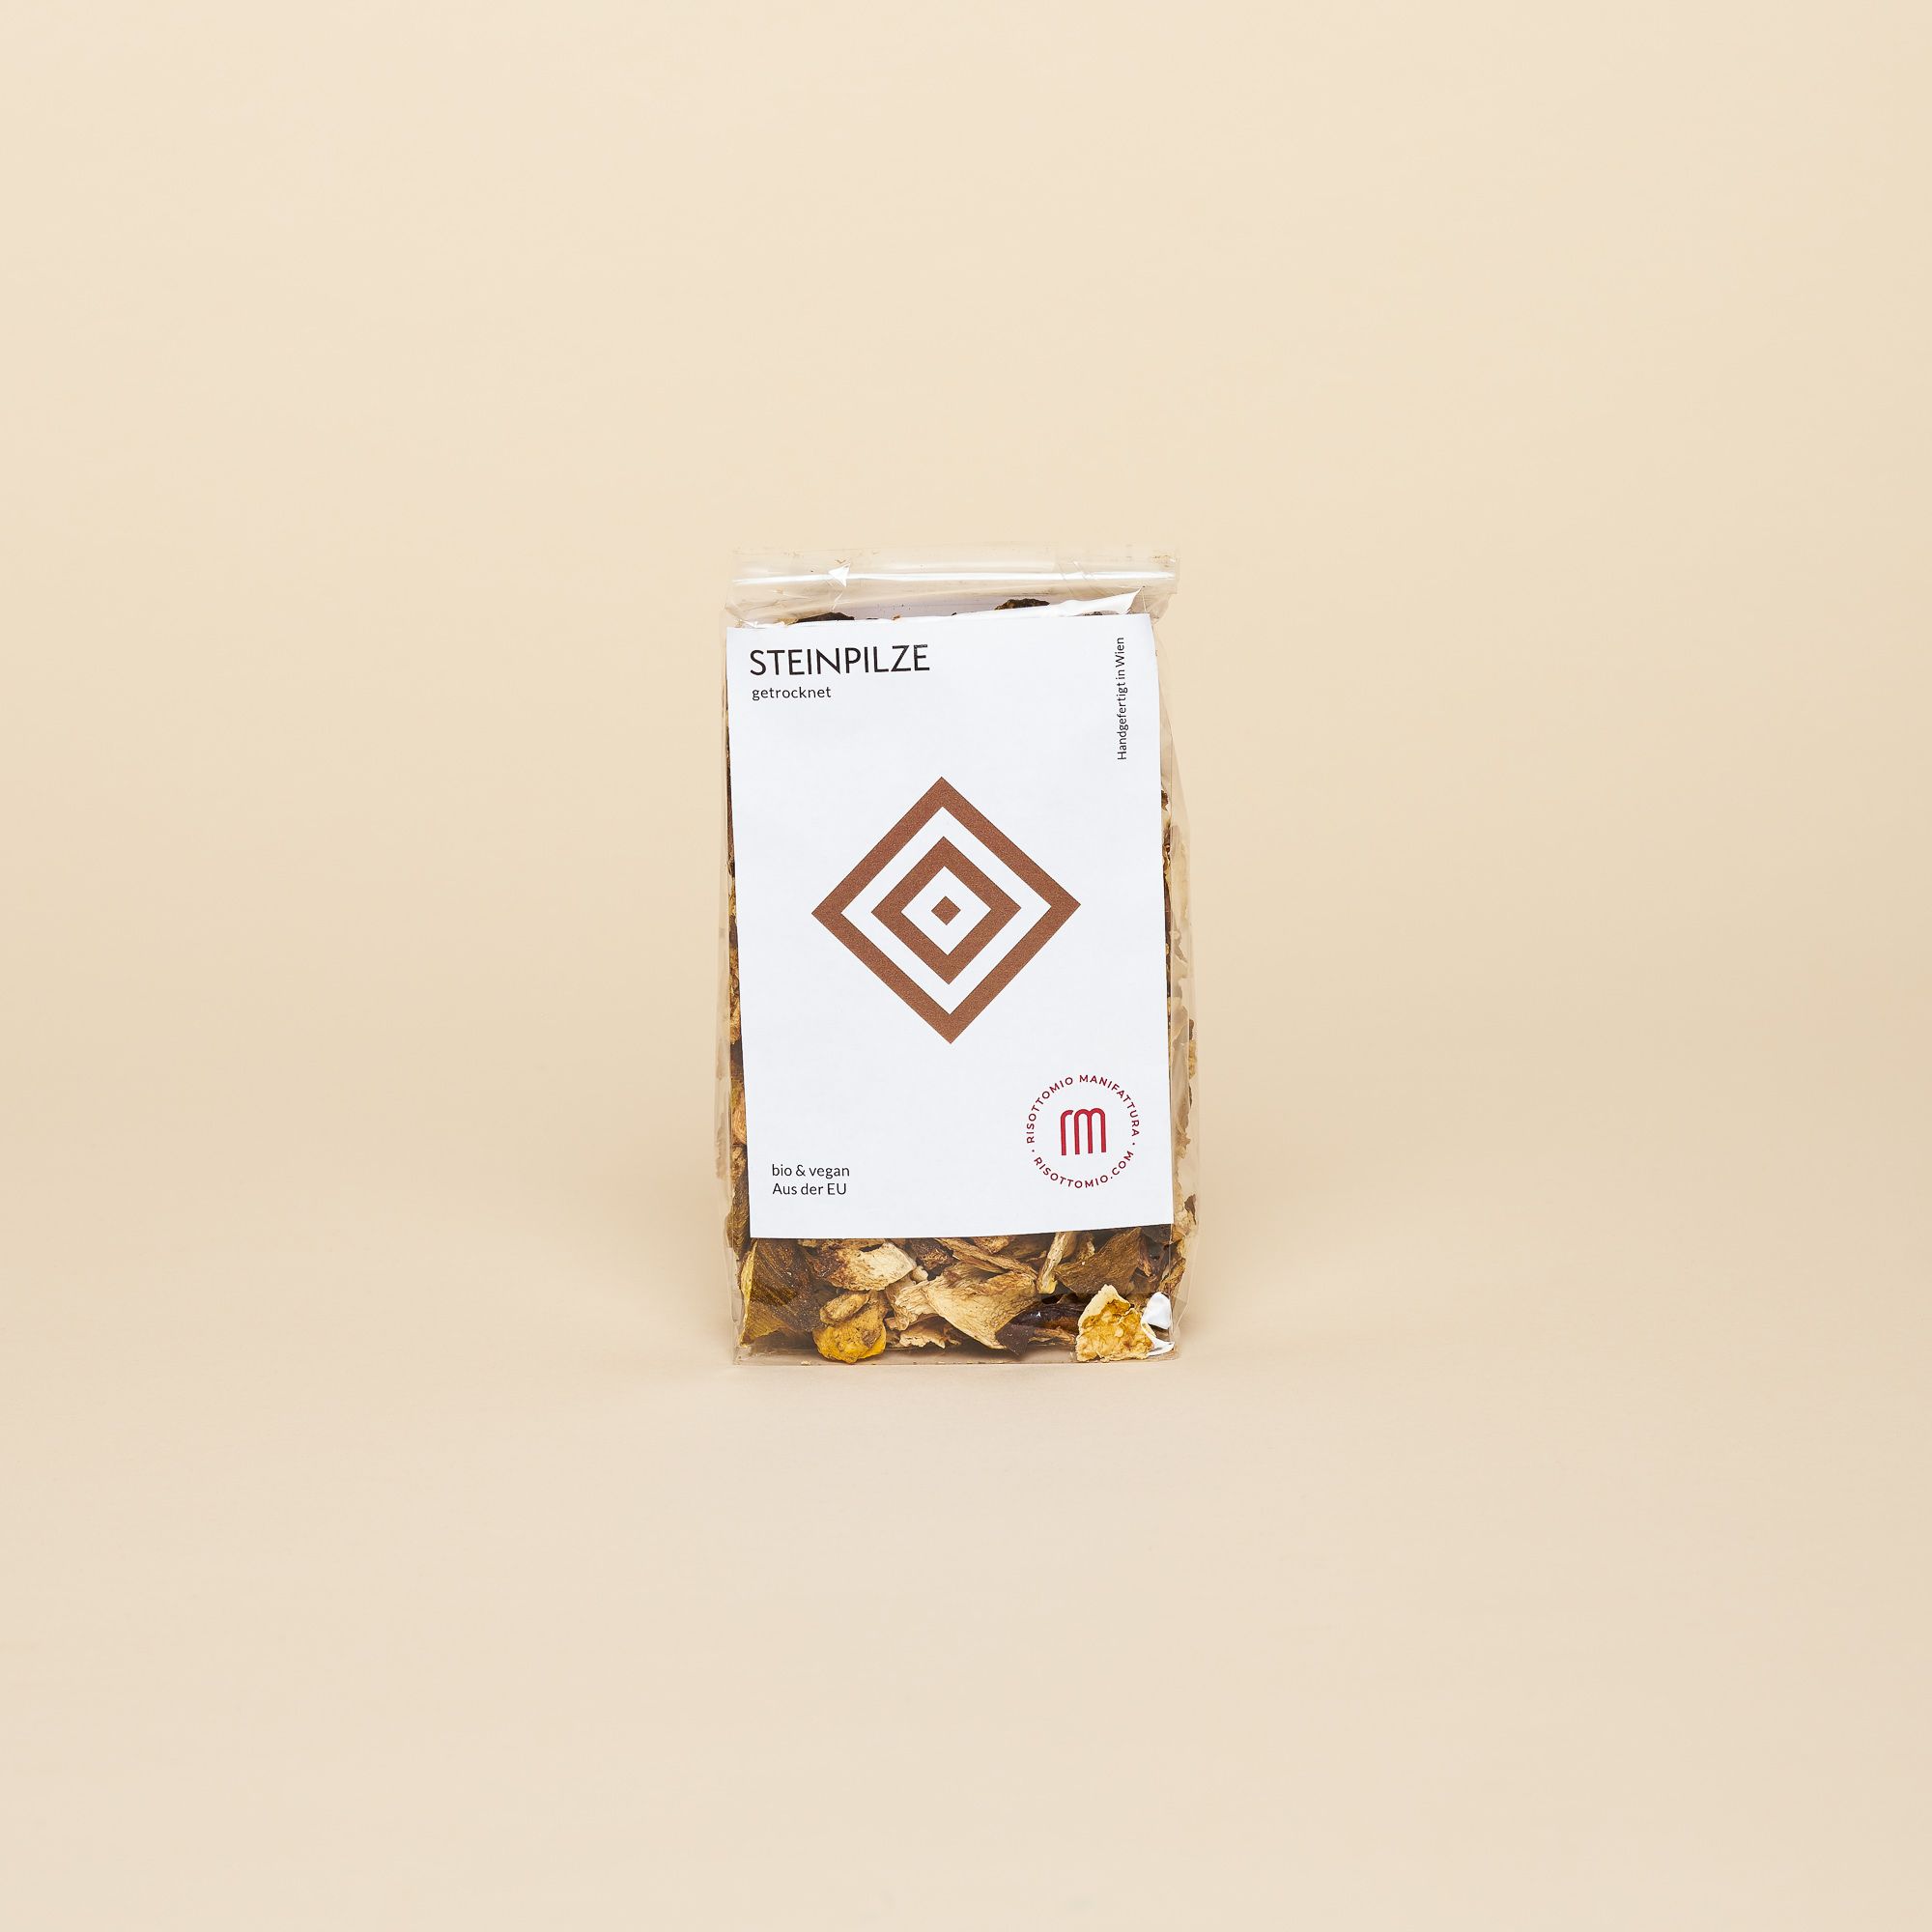 A clear bag with a large white label with a clean, modern Italian label. Inside, dried porcini mushrooms.